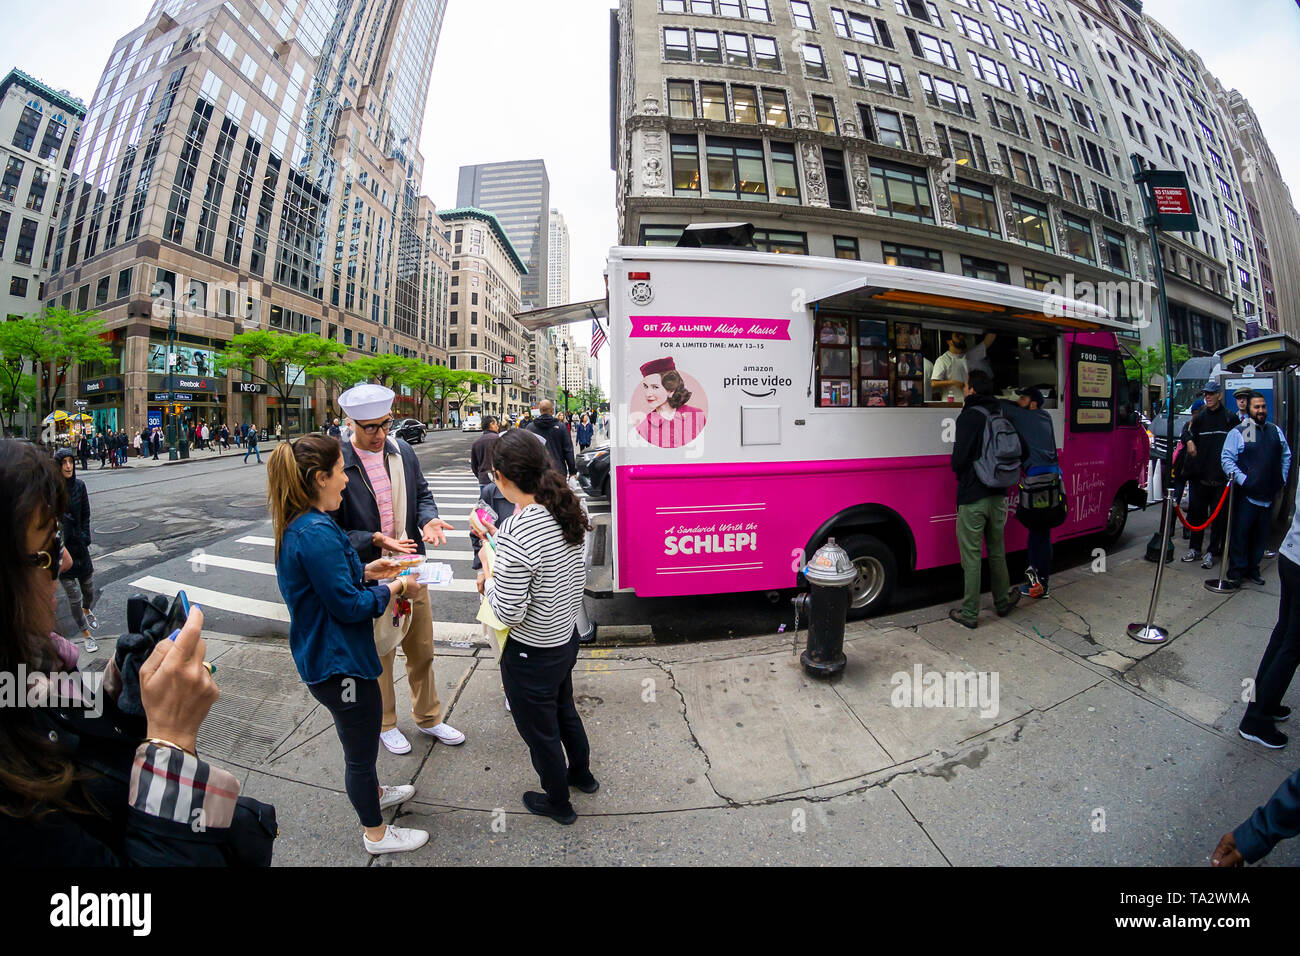 A â€œCarnegie Deliâ€ food truck promoting the Amazon Prime Video series â€œThe Marvelous Mrs. Maiselâ€ in New York on Tuesday, May 14, 2019.  The truck, a promotion for the series during the Upfronts, gave out free â€œMidgeâ€ and â€œSuzieâ€ deli sandwiches and black & white cookies. The Upfronts are a series of events held by the networks to promote their shows to advertisers. (Â© Richard B. Levine) Stock Photo